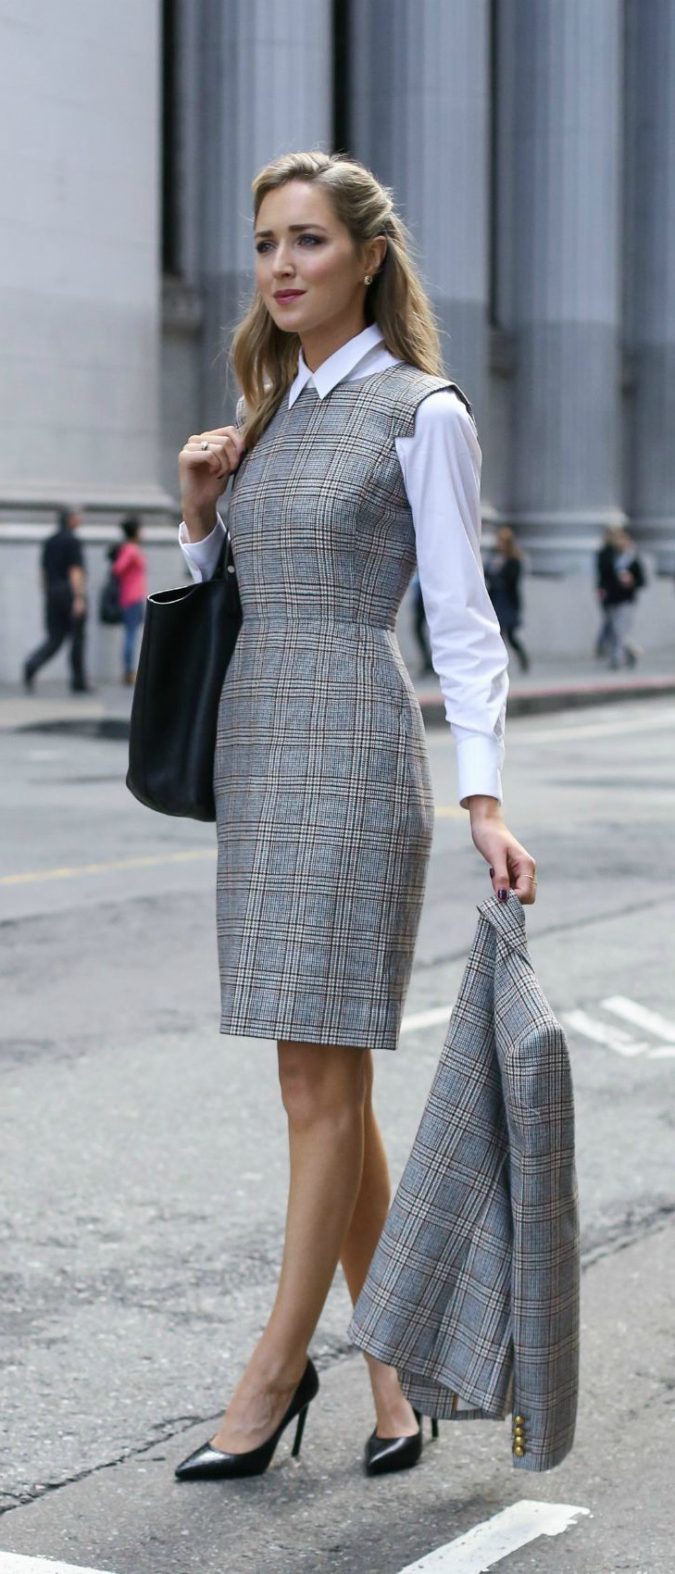 The-Grey-Dress.-e1597876664646-675x1574 60+ Job Interview Outfit Ideas for Women in 2021